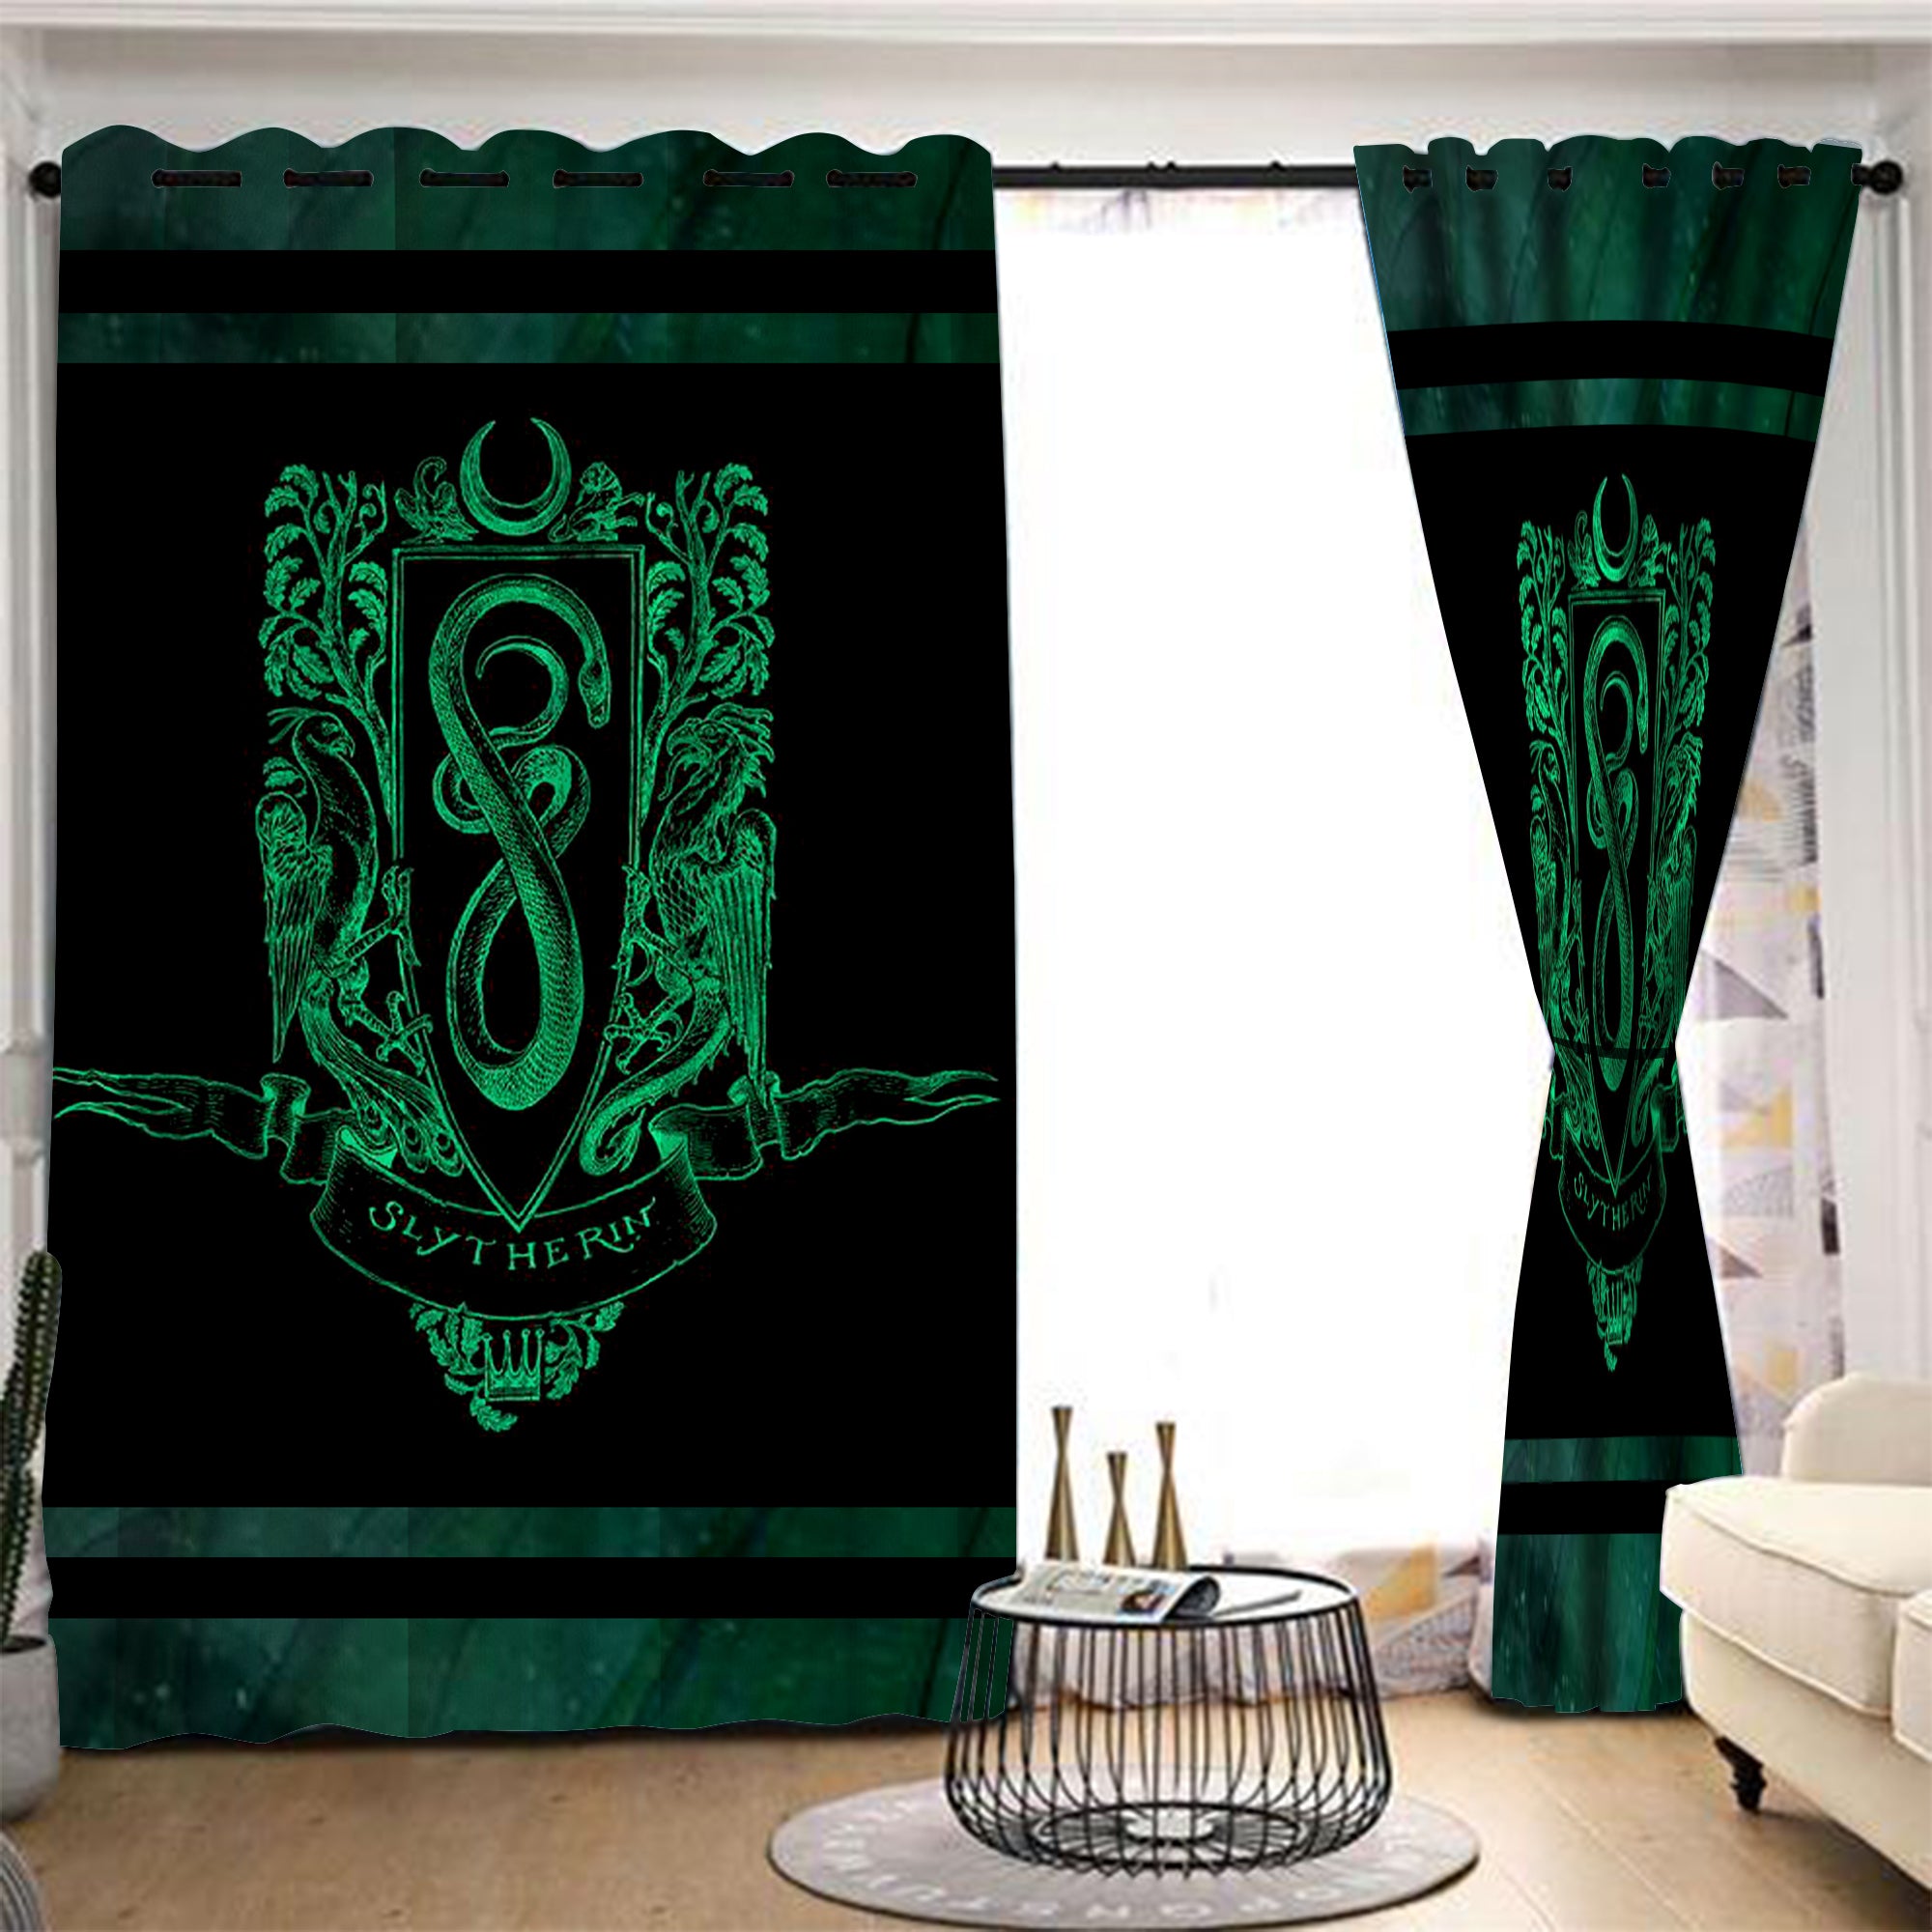 Cunning Like A Slytherin Harry Potter Window Curtain 107x160cm  